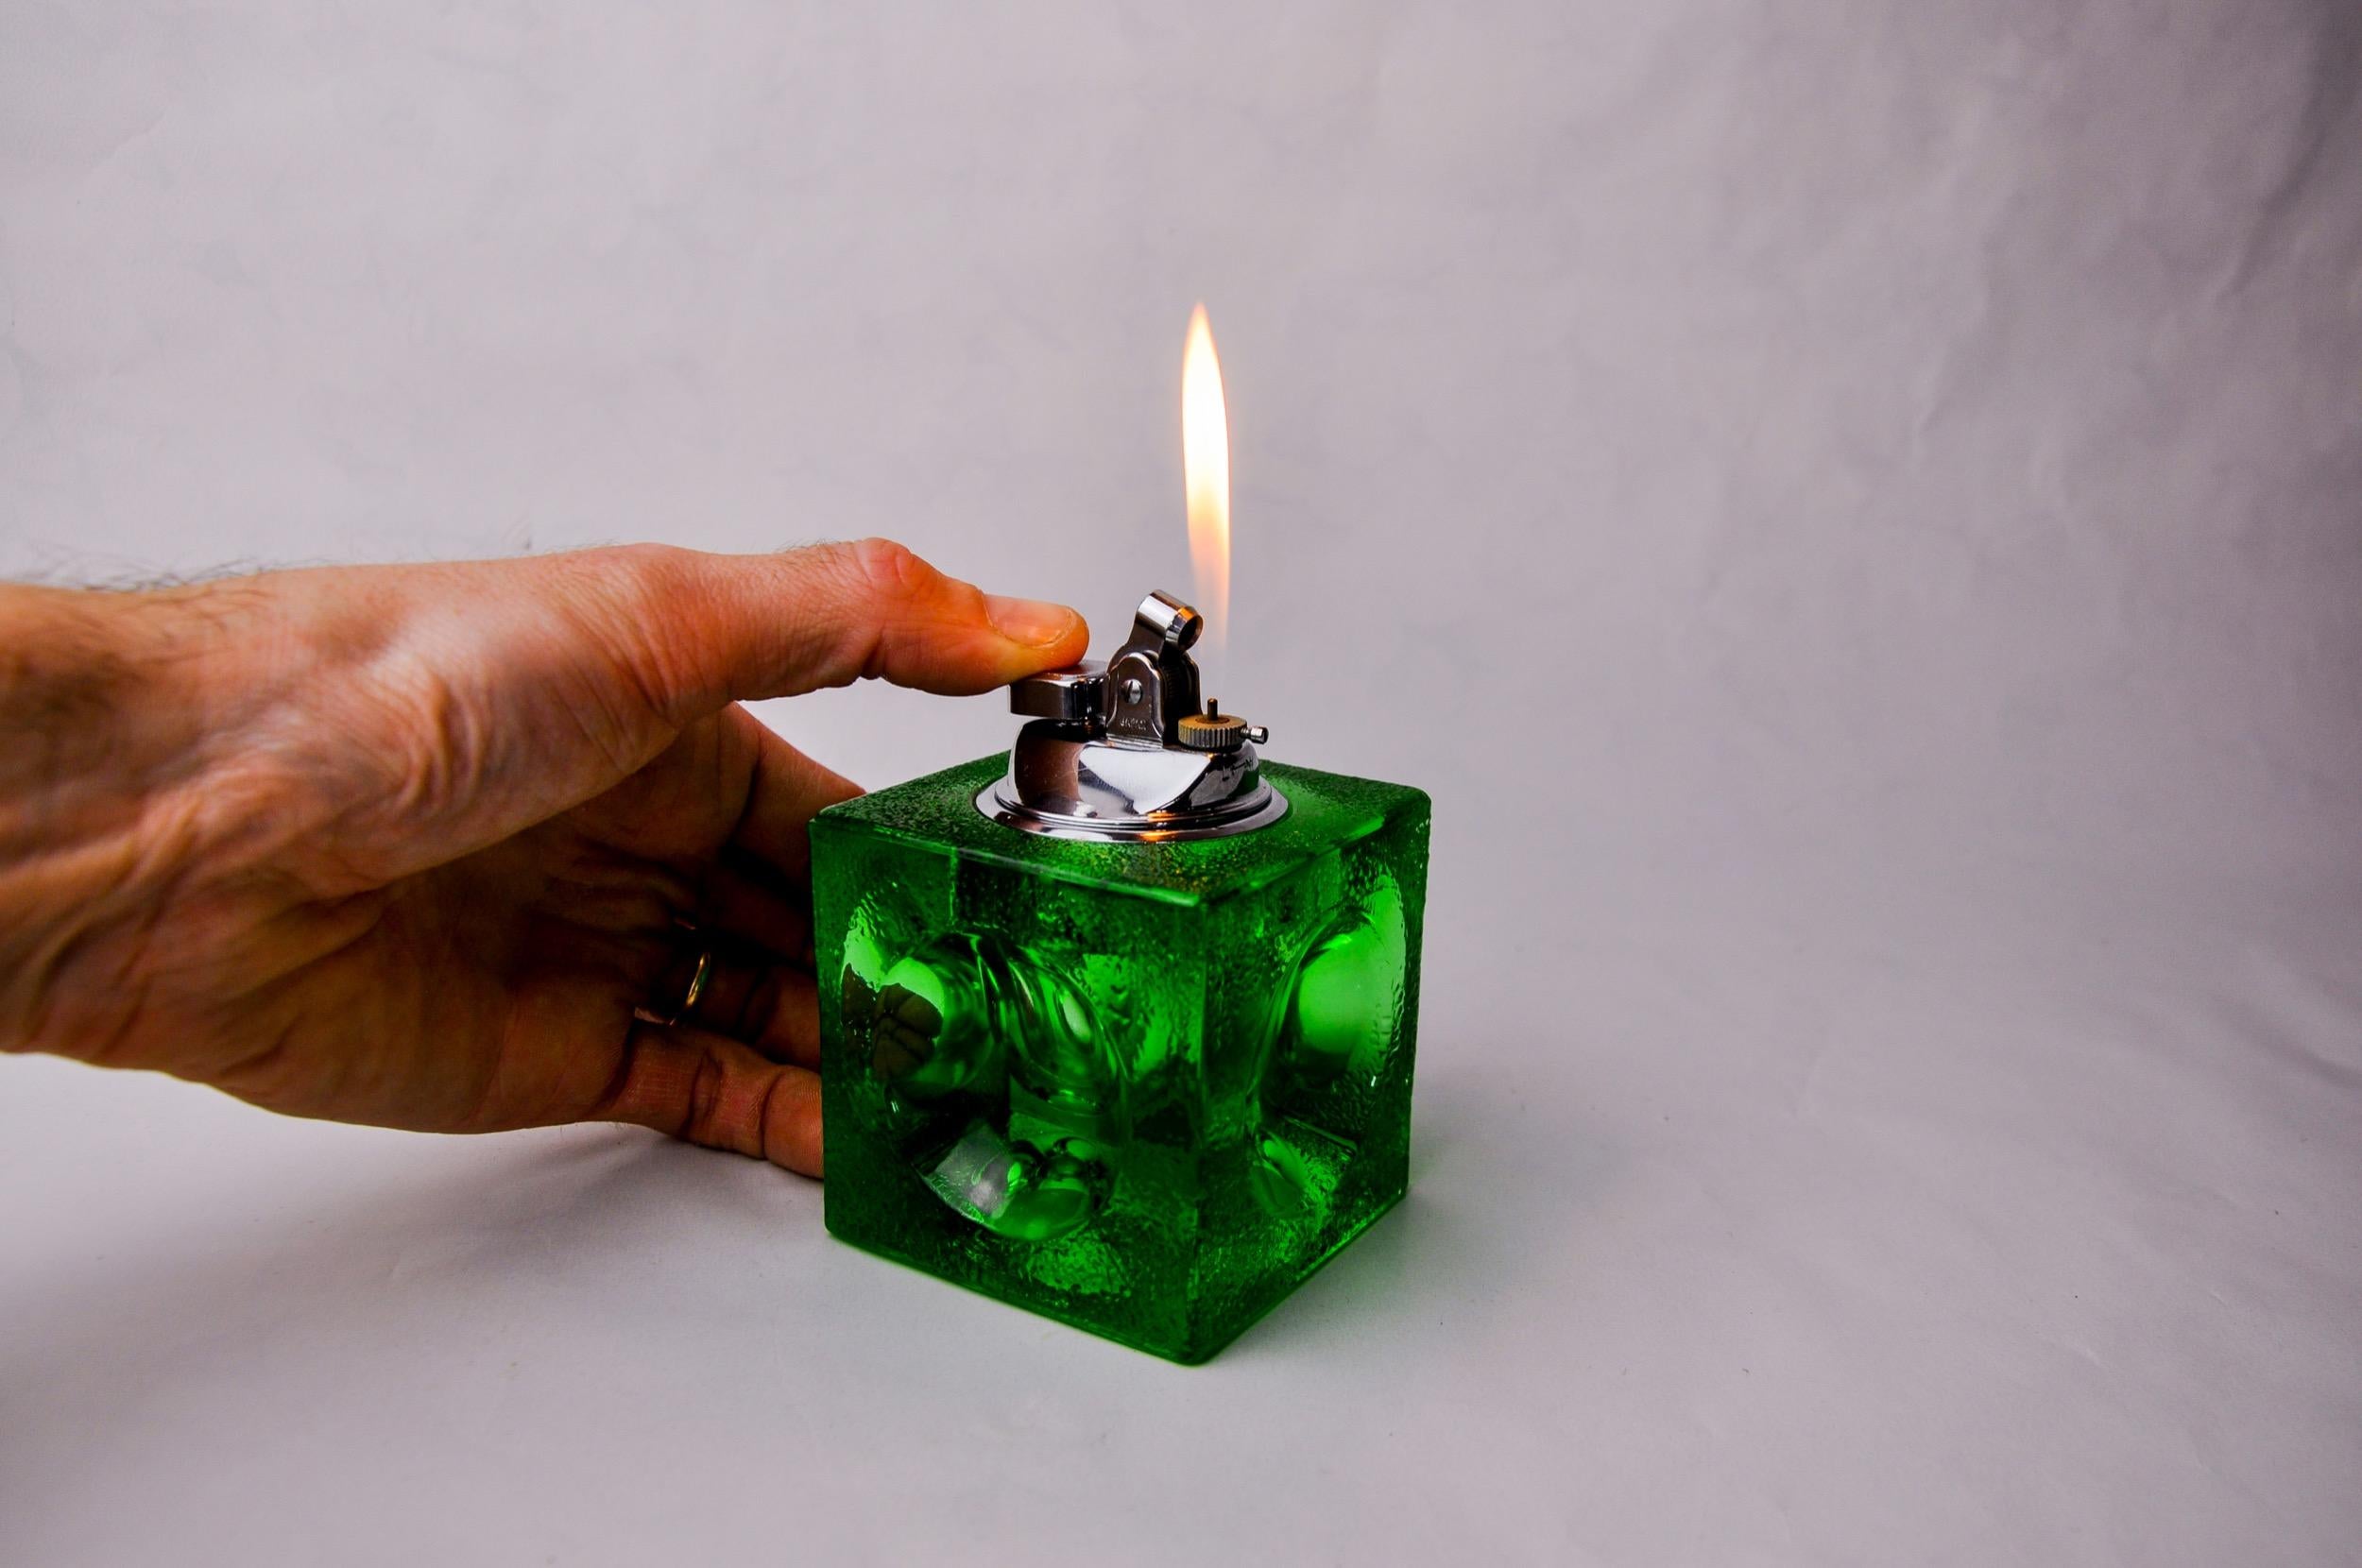 Superb and rare ice cube lighter designed and produced by Antonio Imperatore in Italy in the 1970s. Green murano glass lighter with frosted effect, handcrafted by Venetian glass masters. Decorative object that will bring a real designer touch to